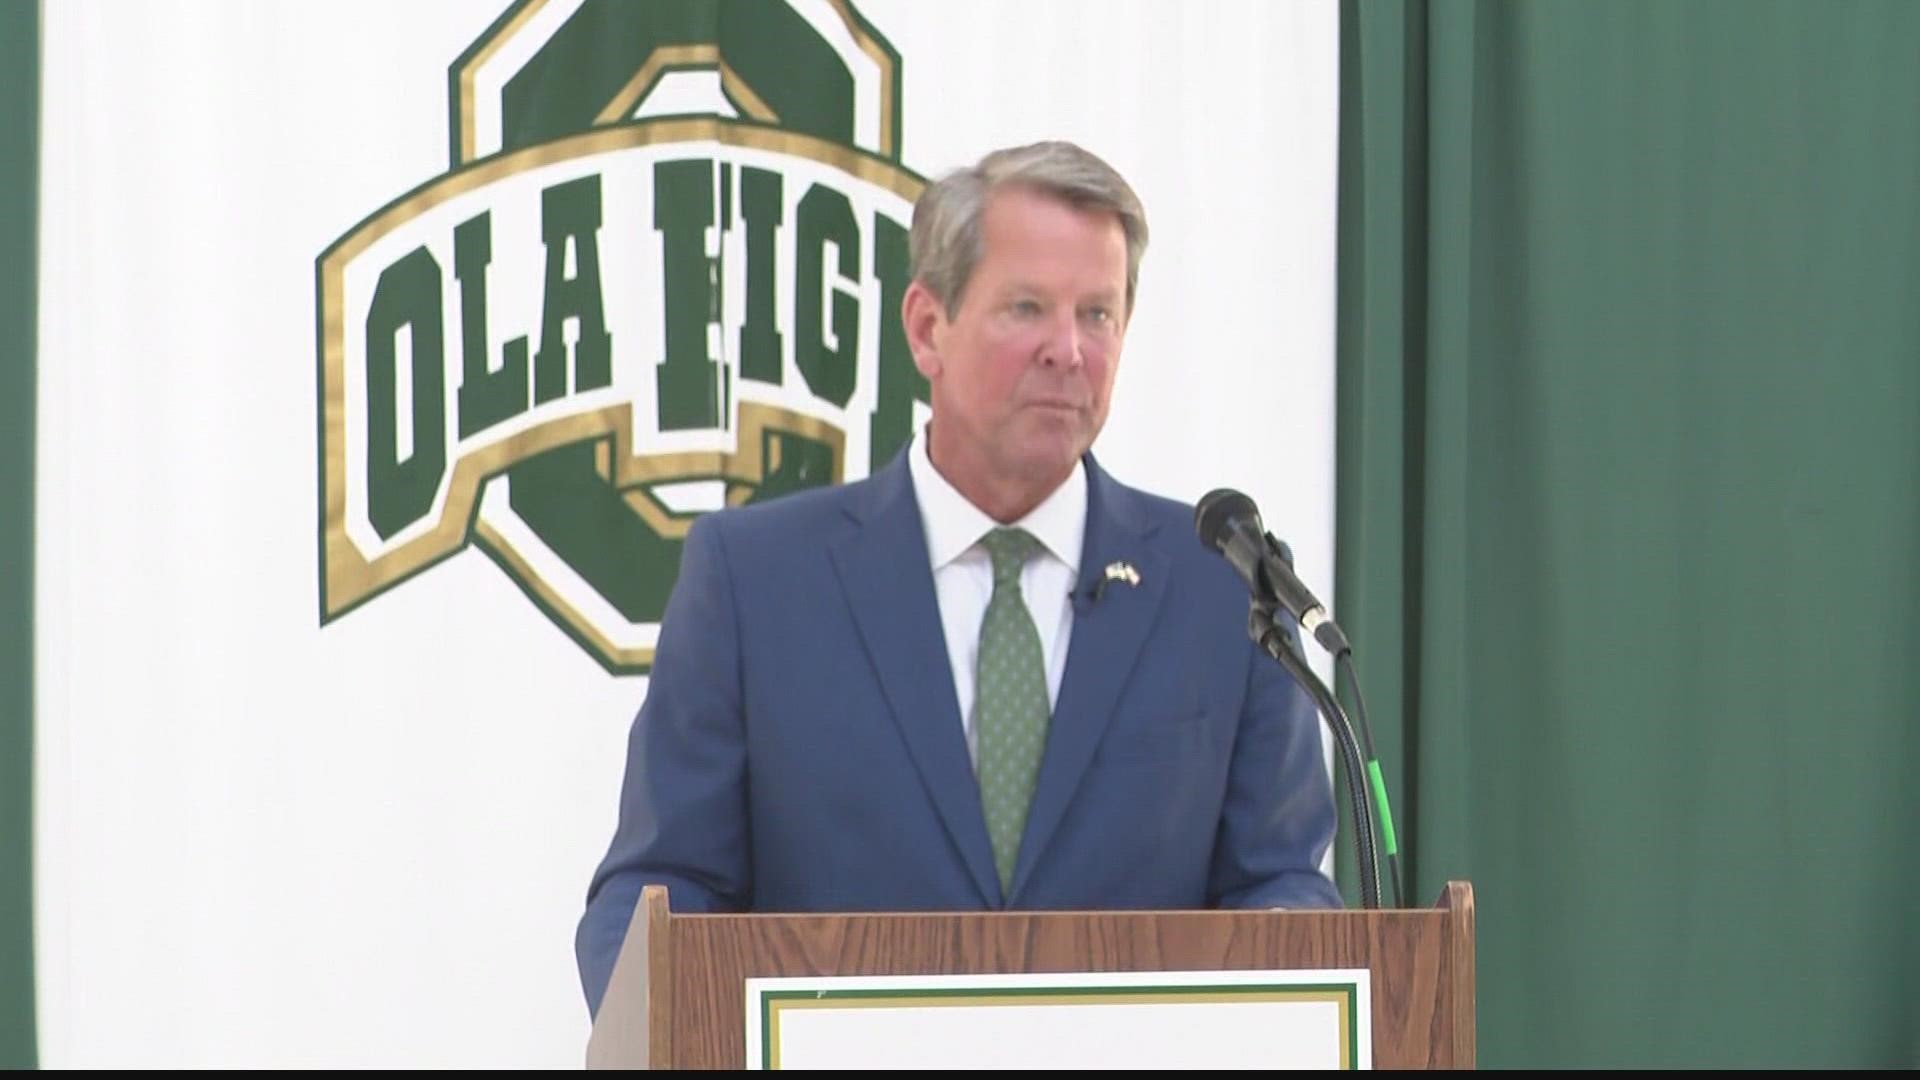 Gov. Kemp announced the state is giving $125 million to teachers to buy materials for their classrooms.